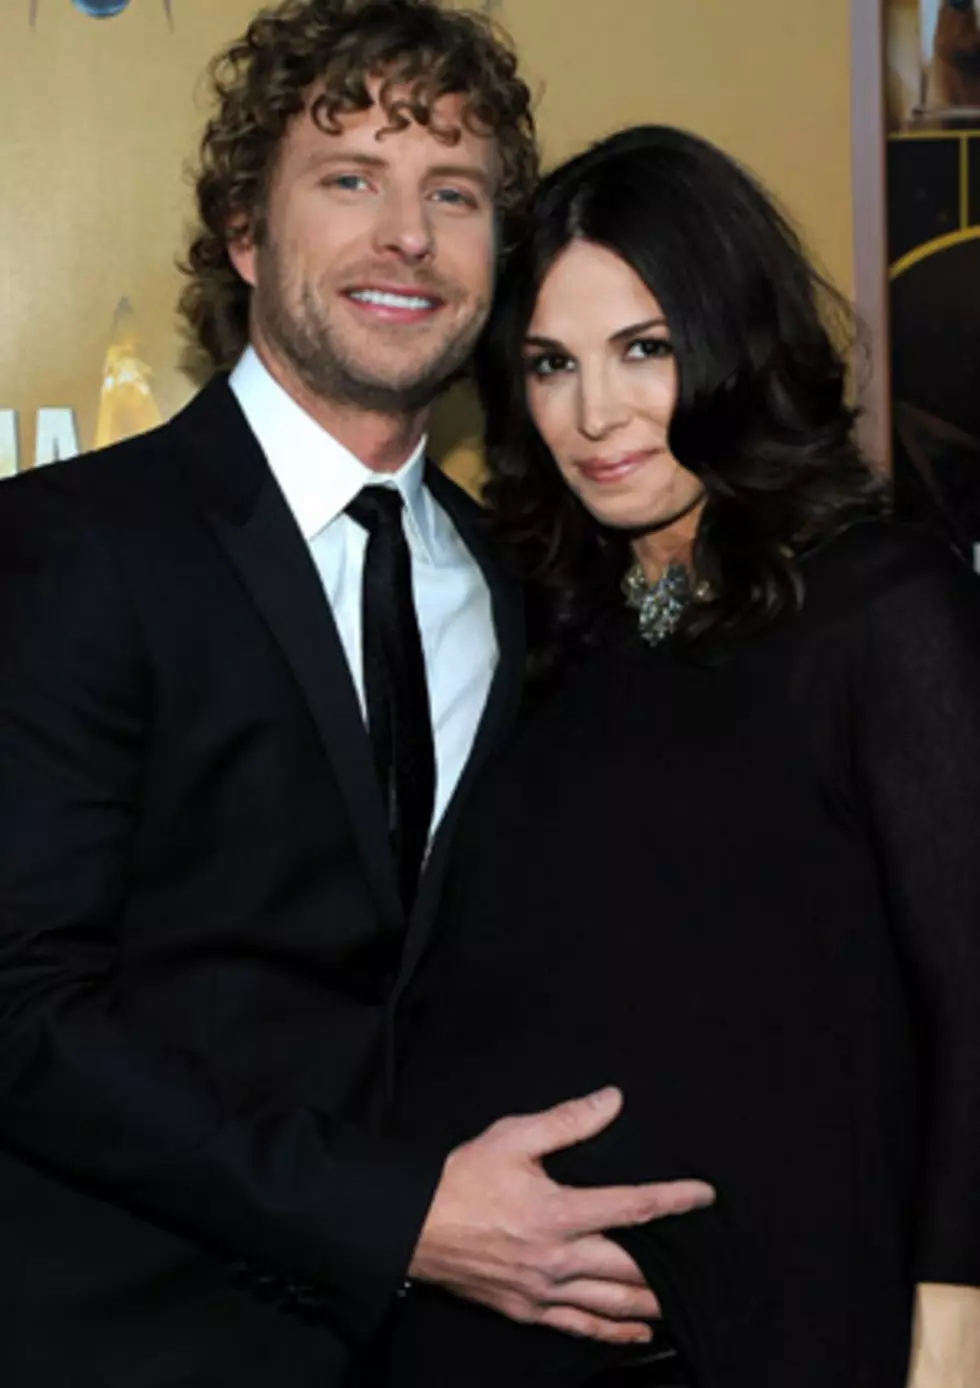 Dierks Bentley and Wife Cassidy Welcome a Christmas Baby